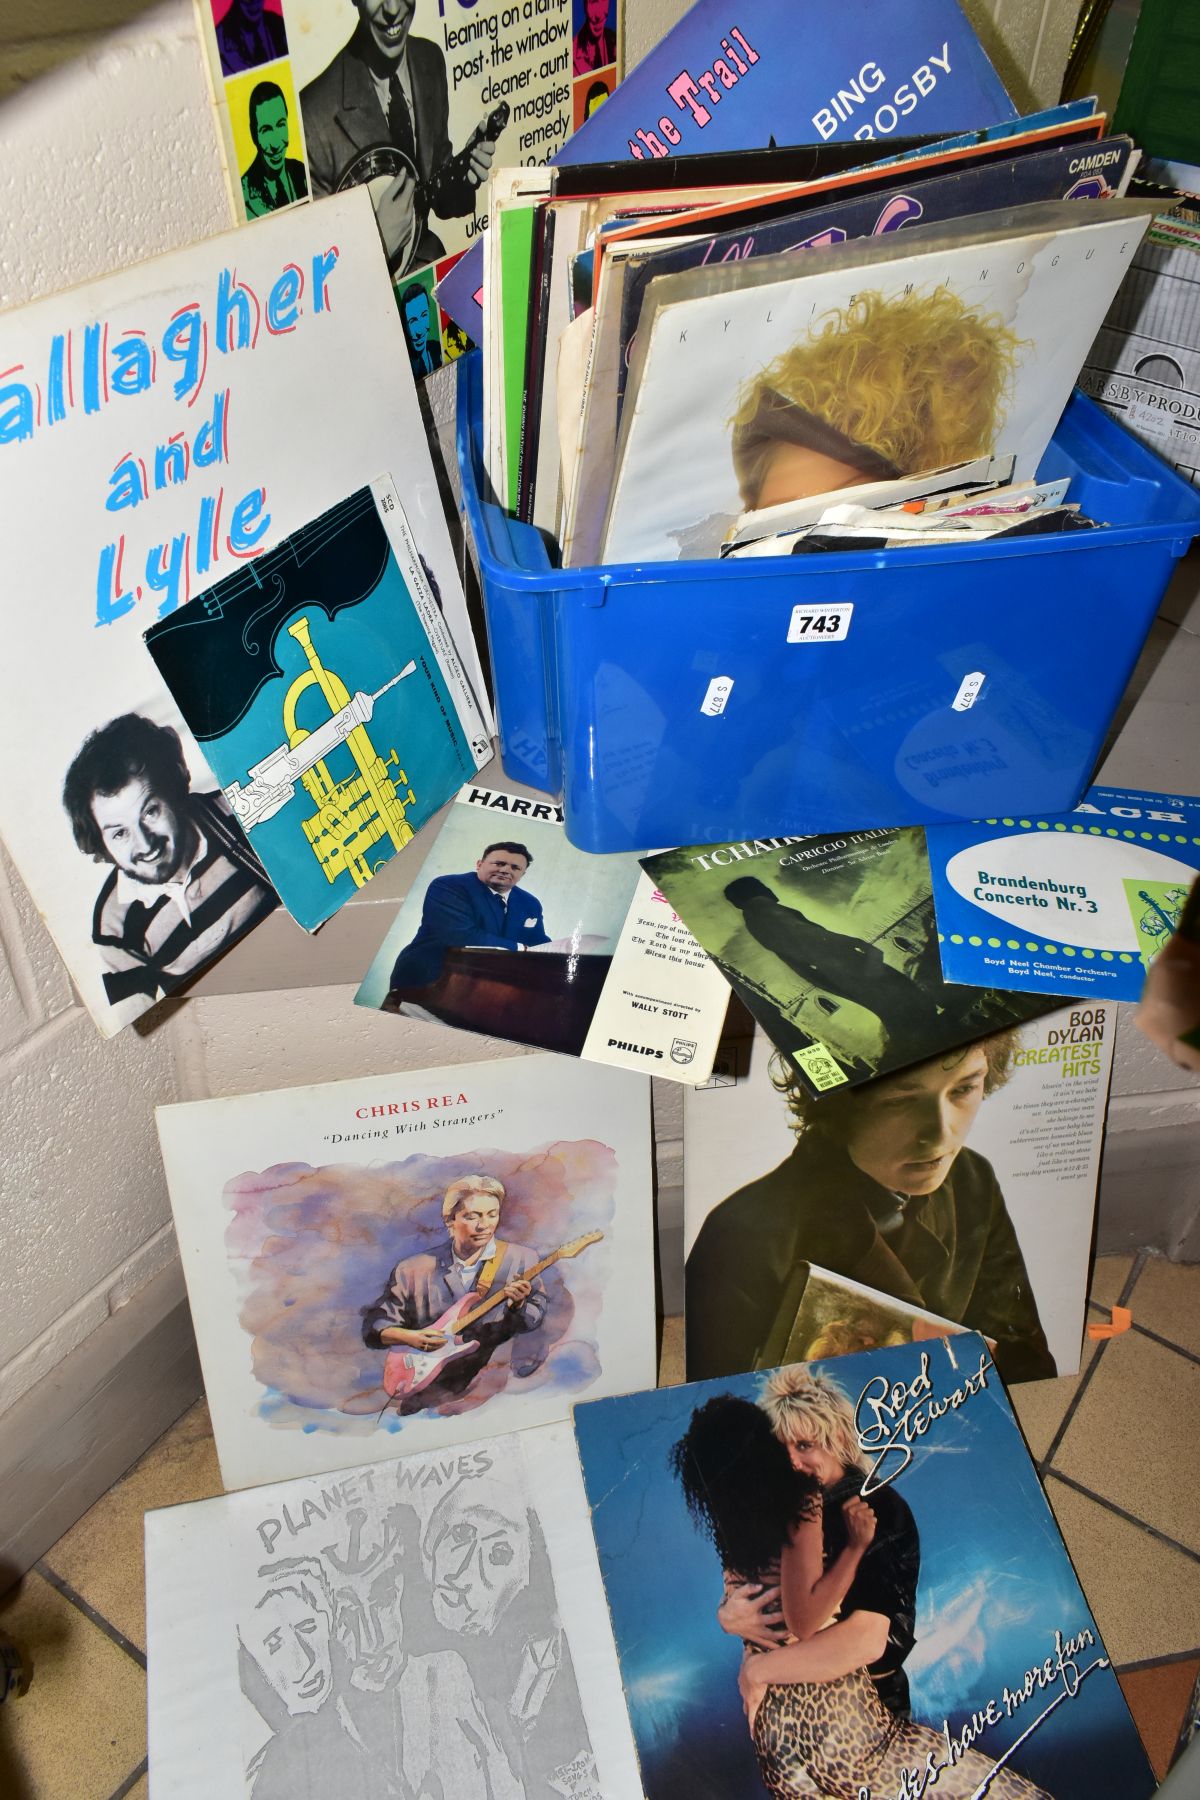 A BOX OF LP RECORDS AND 7 INCH SINGLES, LPs include Gallagher and Lyle - Breakaway, Bob Dylan -